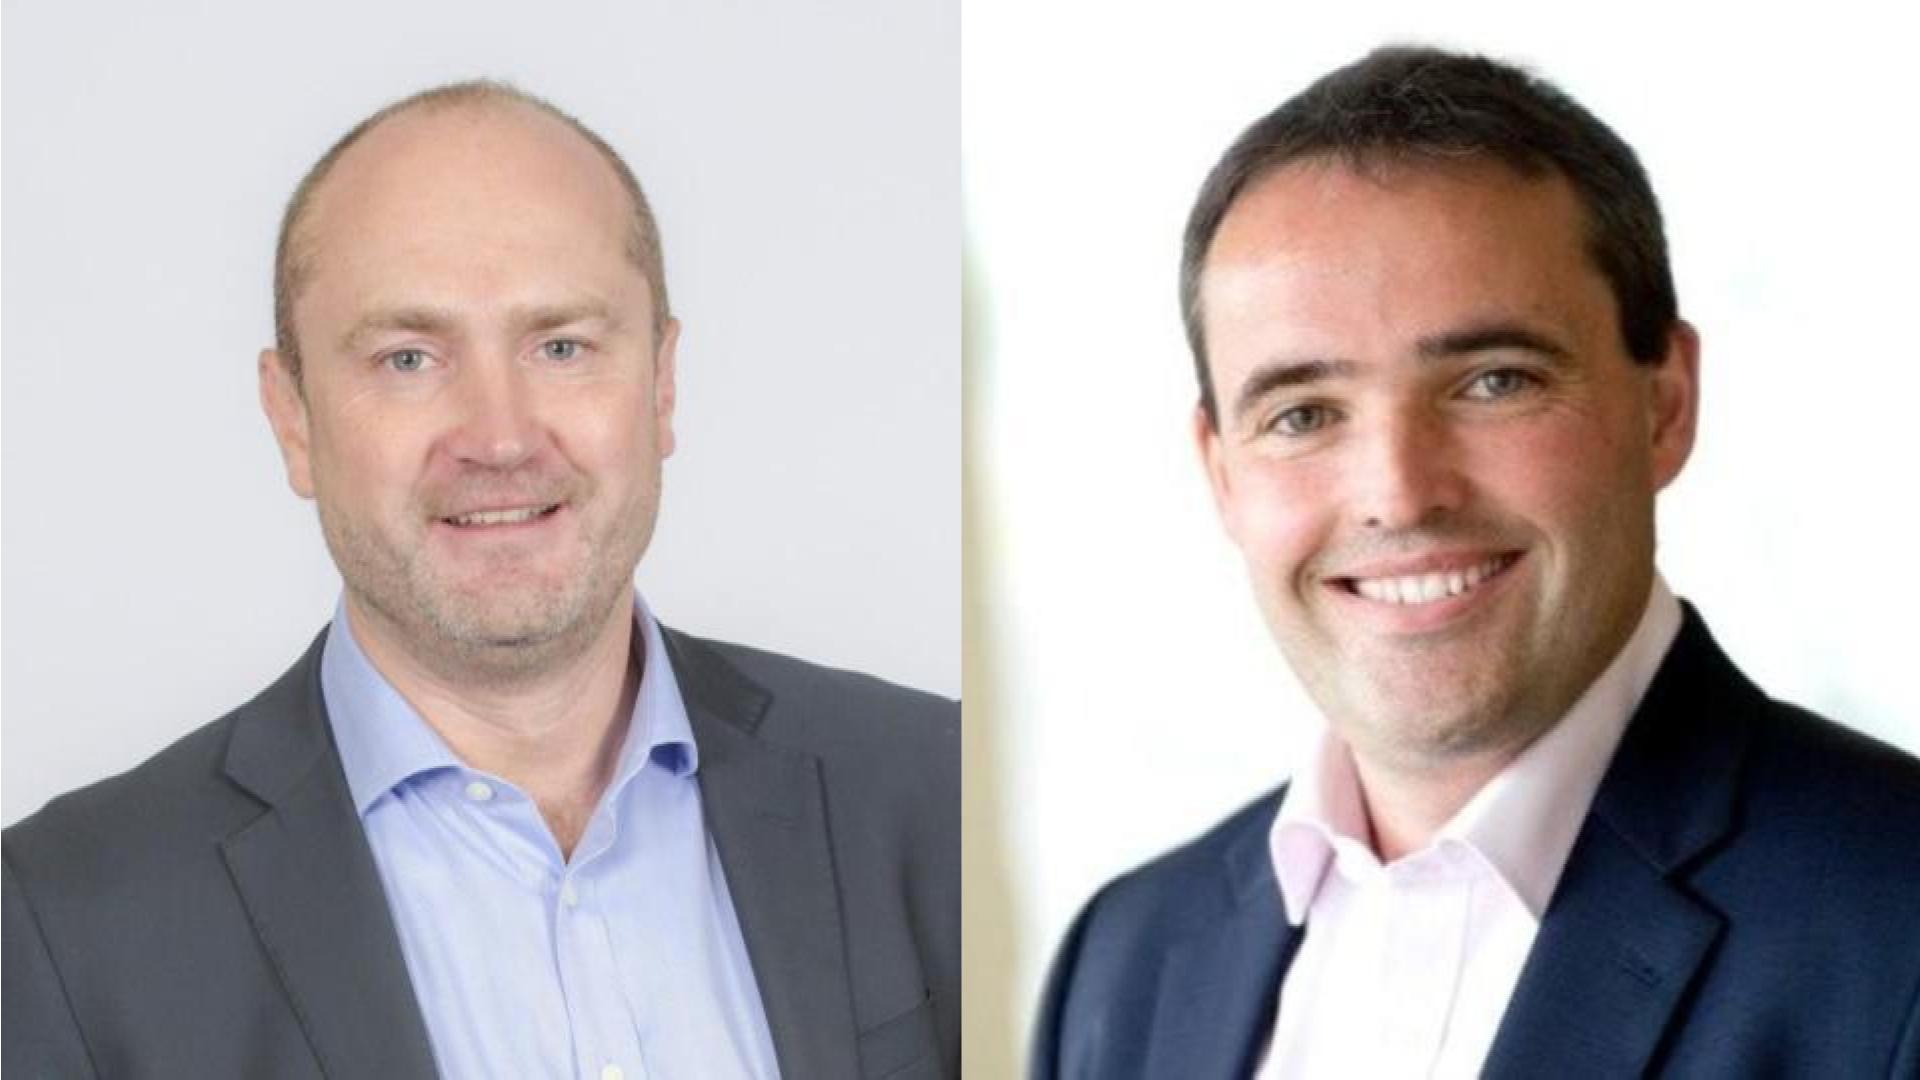 PwC appoints Matthew Hall and Robin McBurnie as senior partners in Scotland